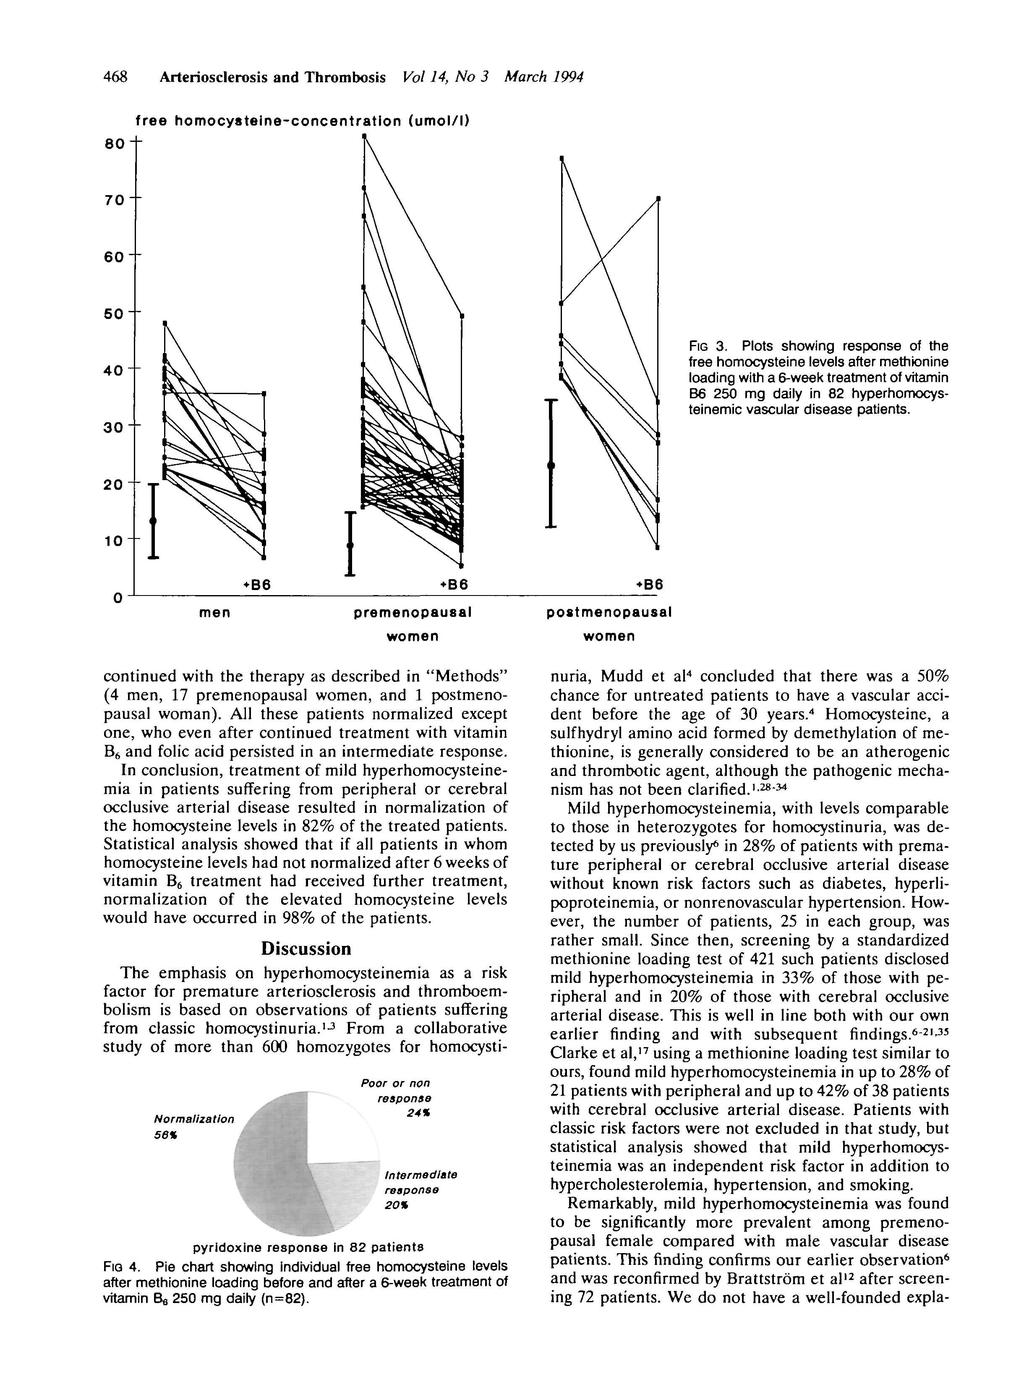 468 Arteriosclerosis and Thrombosis Vol 14, No 3 March 1994 free homocyateine-concentration (umol/l) 80" 70" 60-50 " FIG 3.